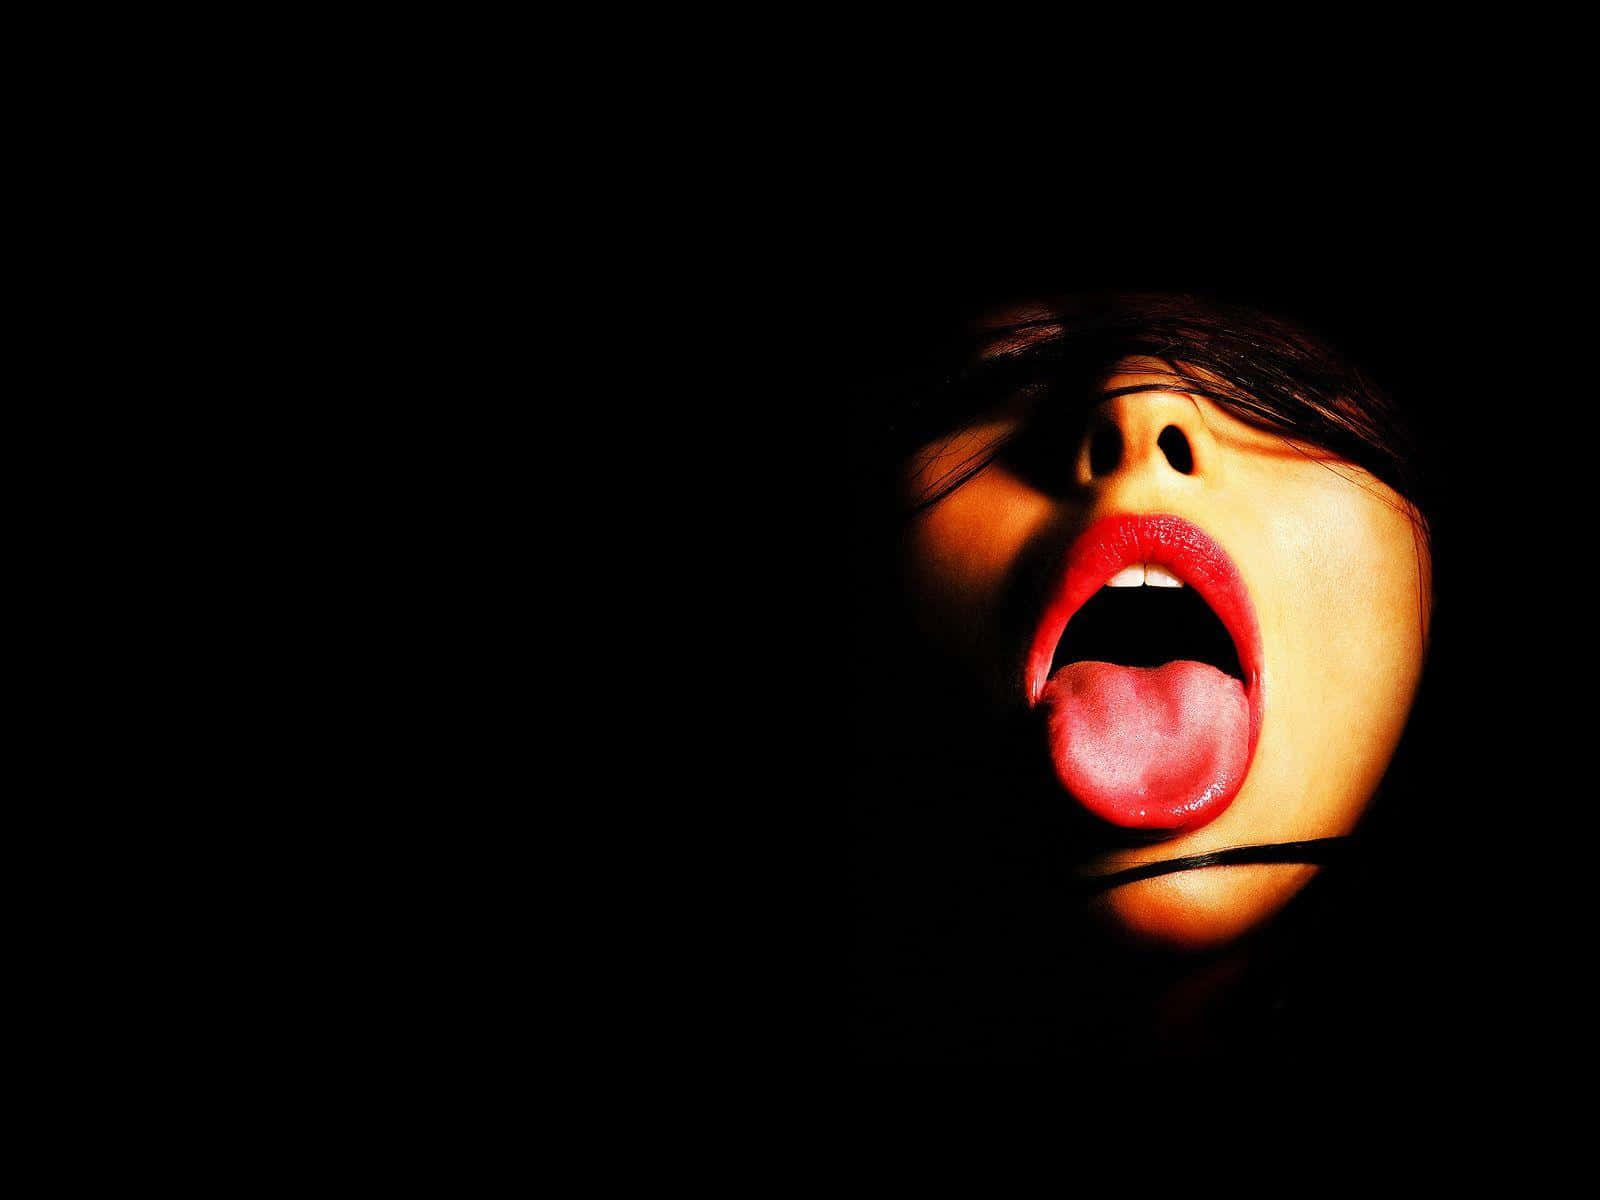 Lick It Tongue Out Cover Photo Wallpaper